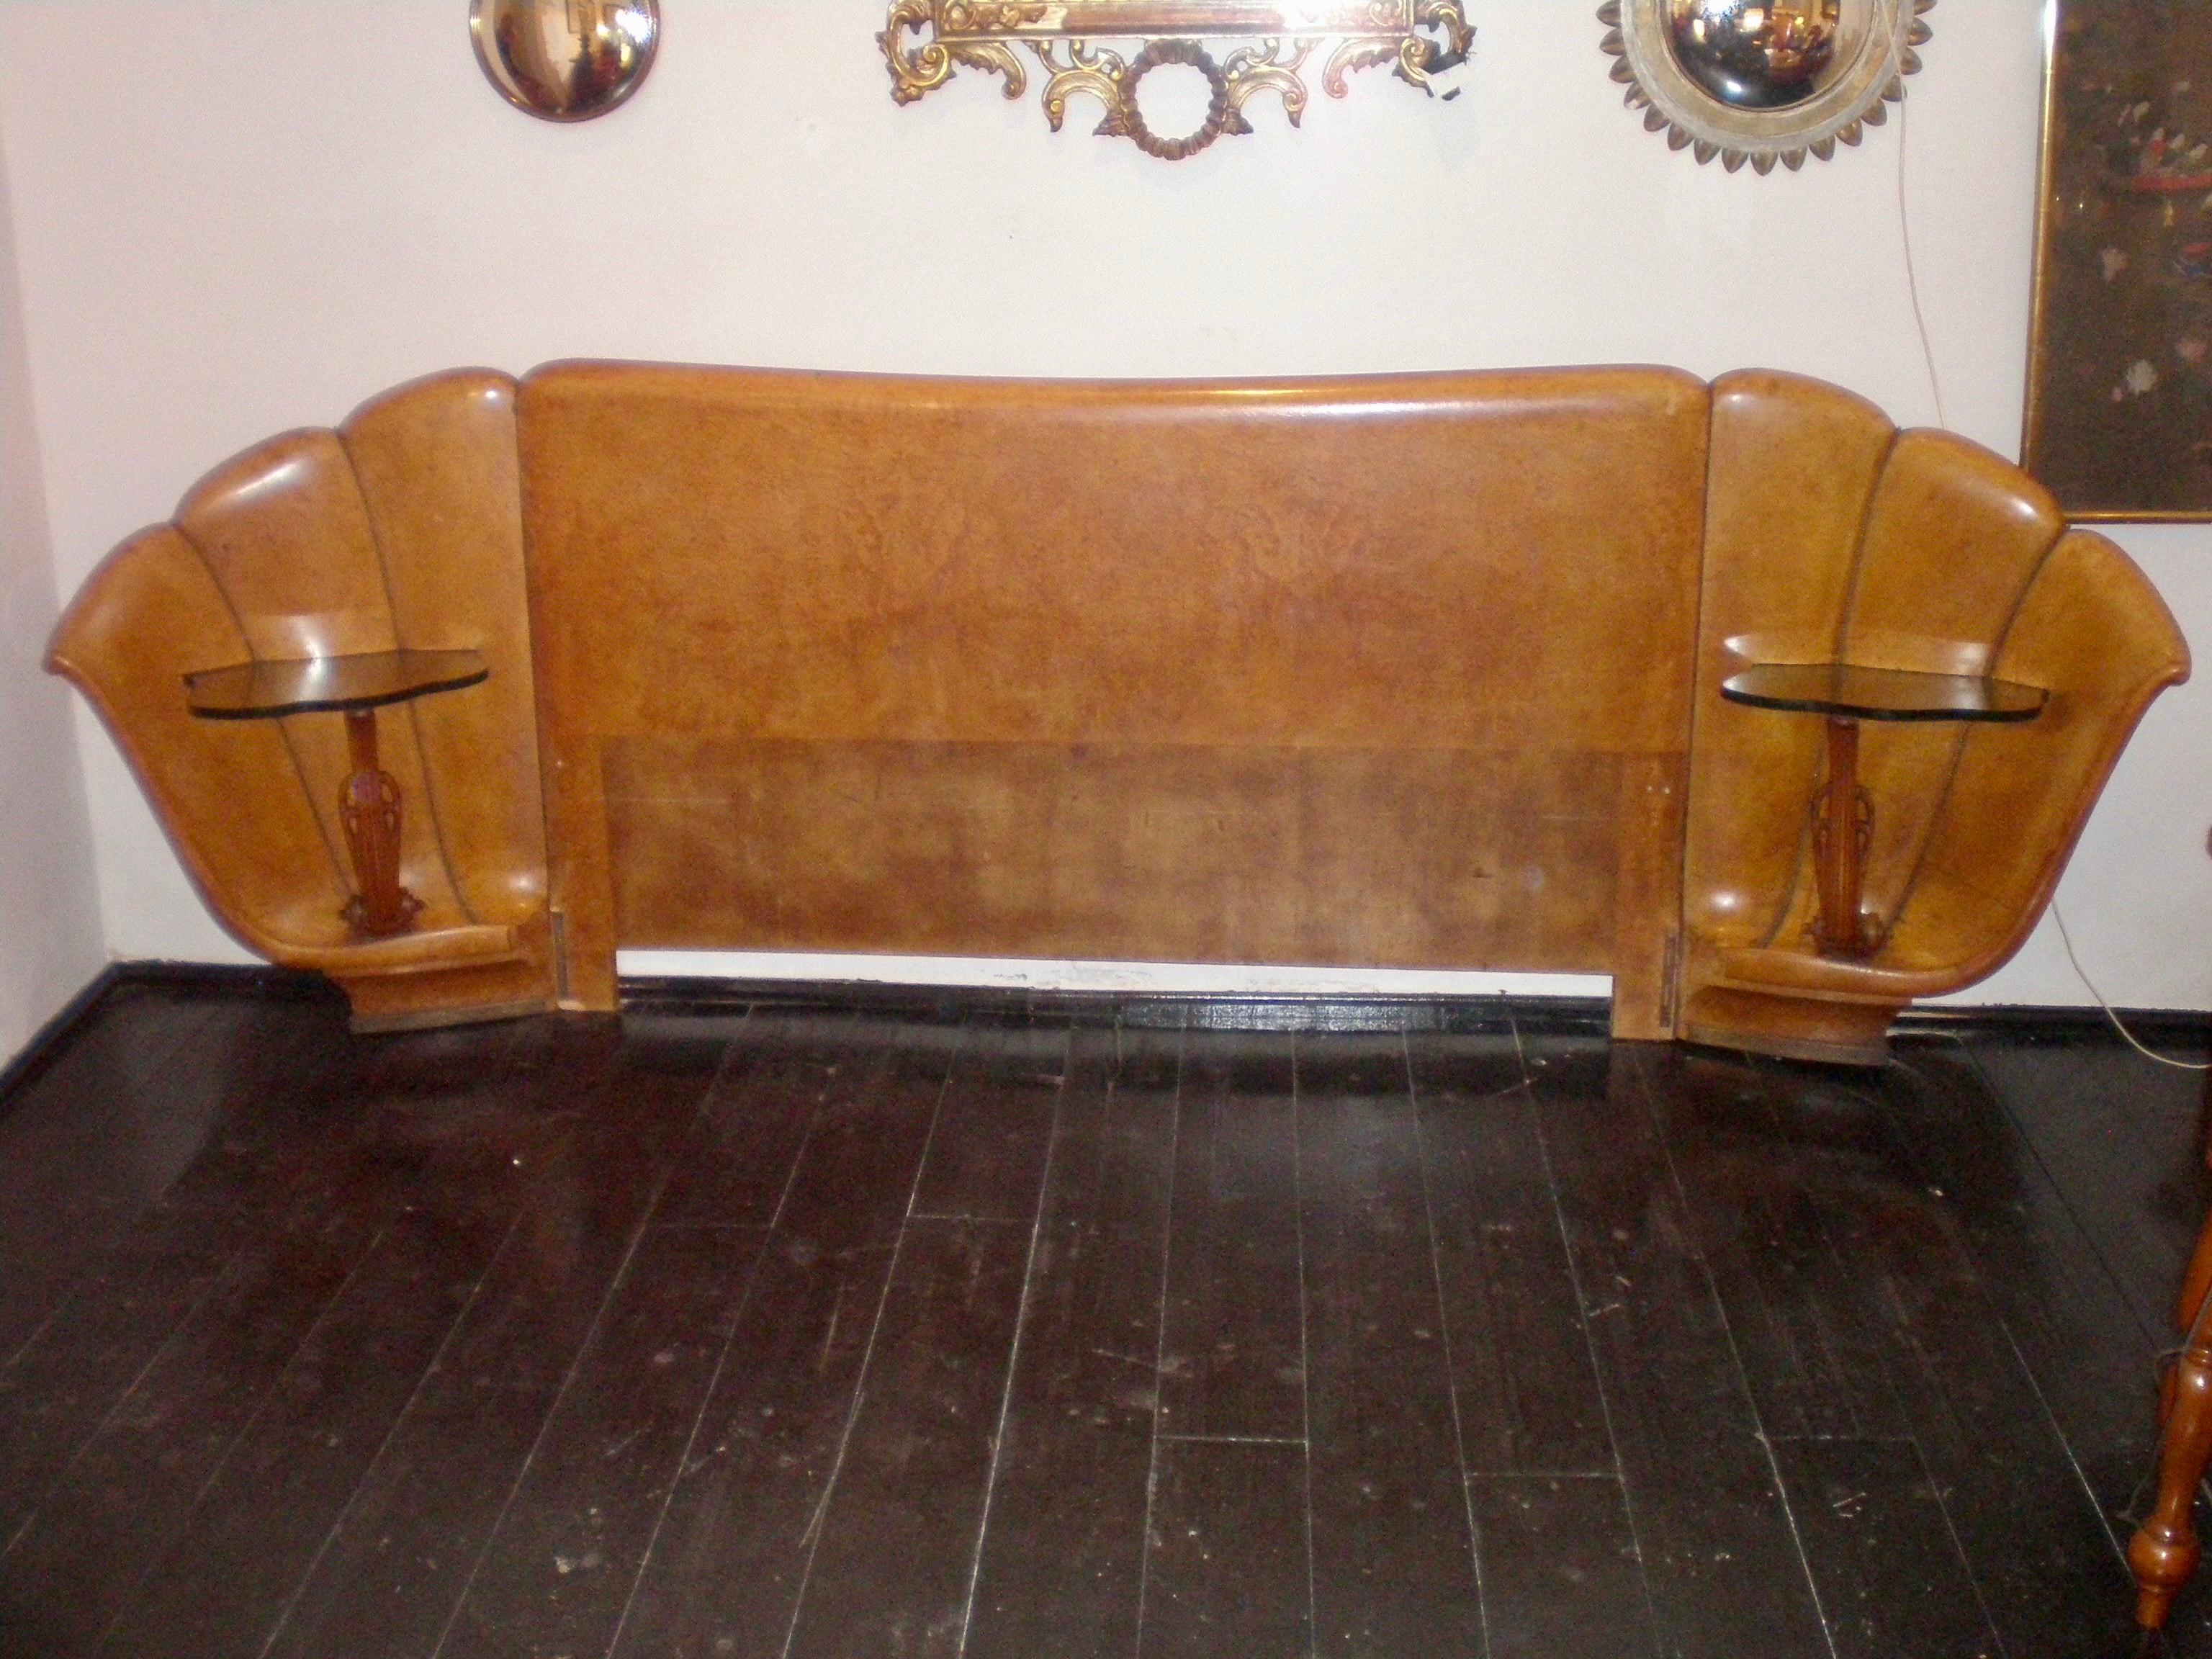 Italian burled walnut Art Deco headboard with attached shell shaped nightstands with brass studded inlays. 
The nightstands have a scalloped crystal top.
The headboard consists of three wood pieces that can be disassembled.
Queen size bed frame. The